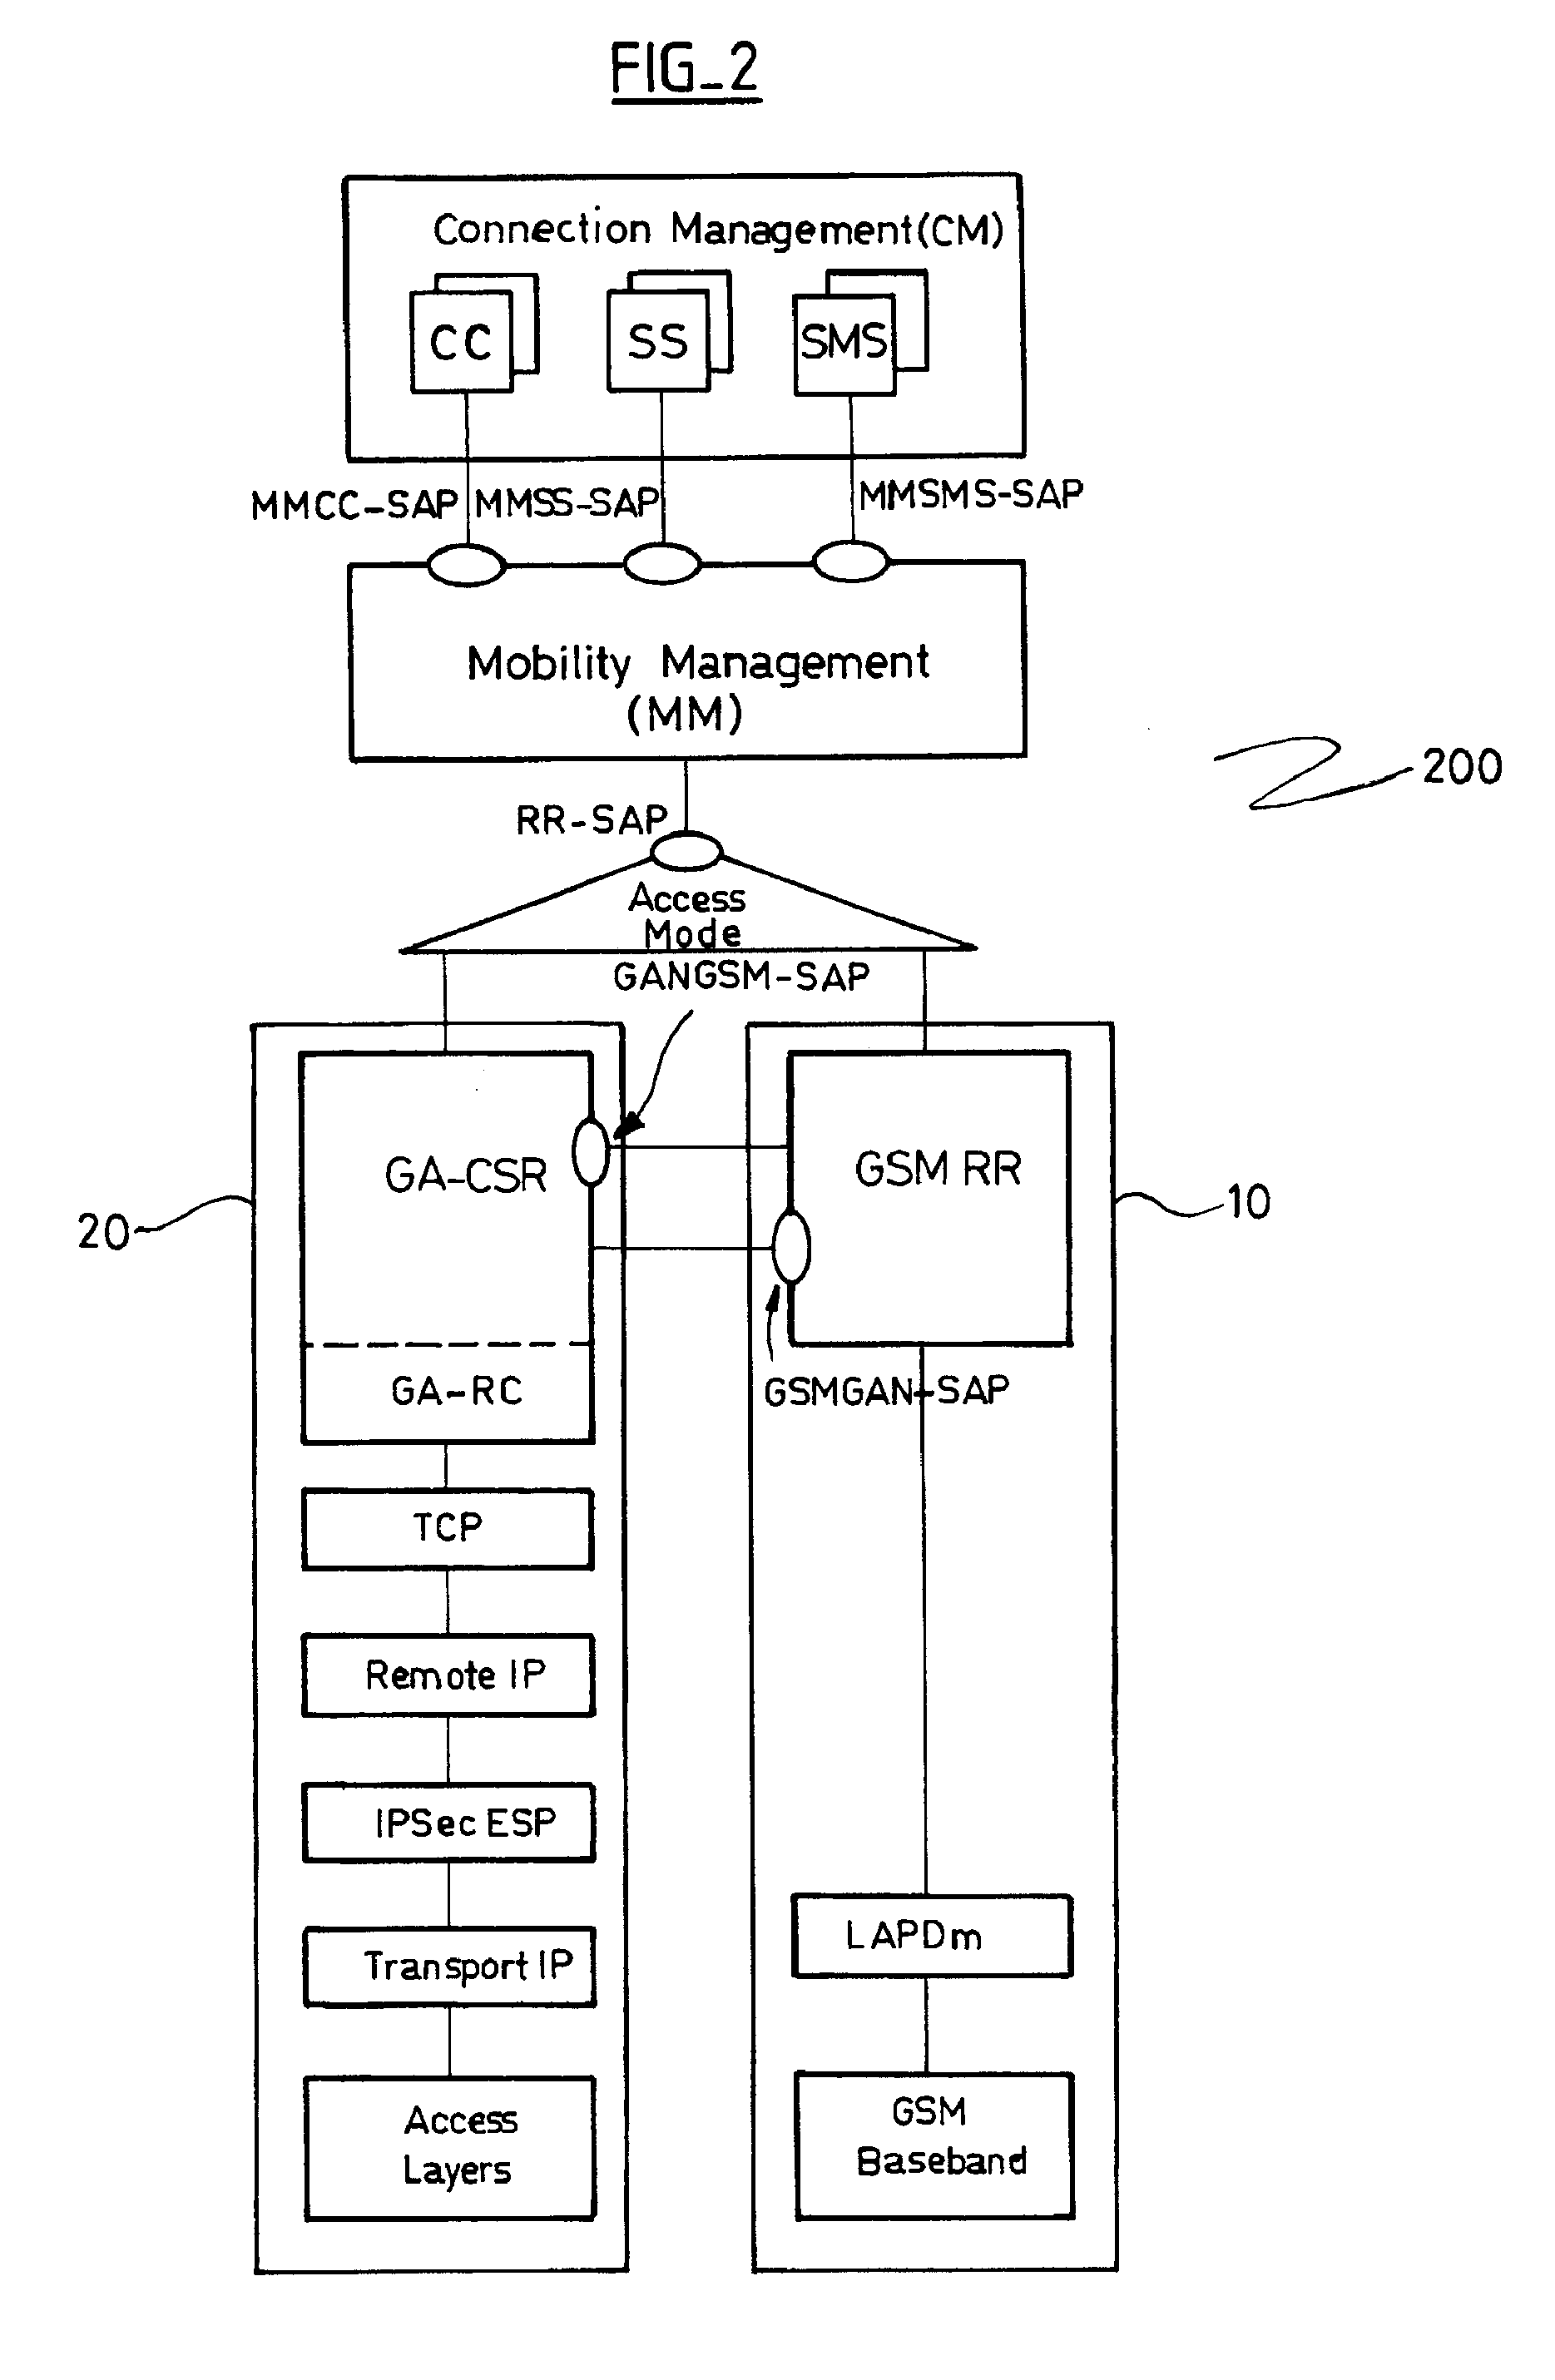 Radio communication device with access means conforming to the GAN and 3gpp-wlan interworking technologies, and corresponding access network controller